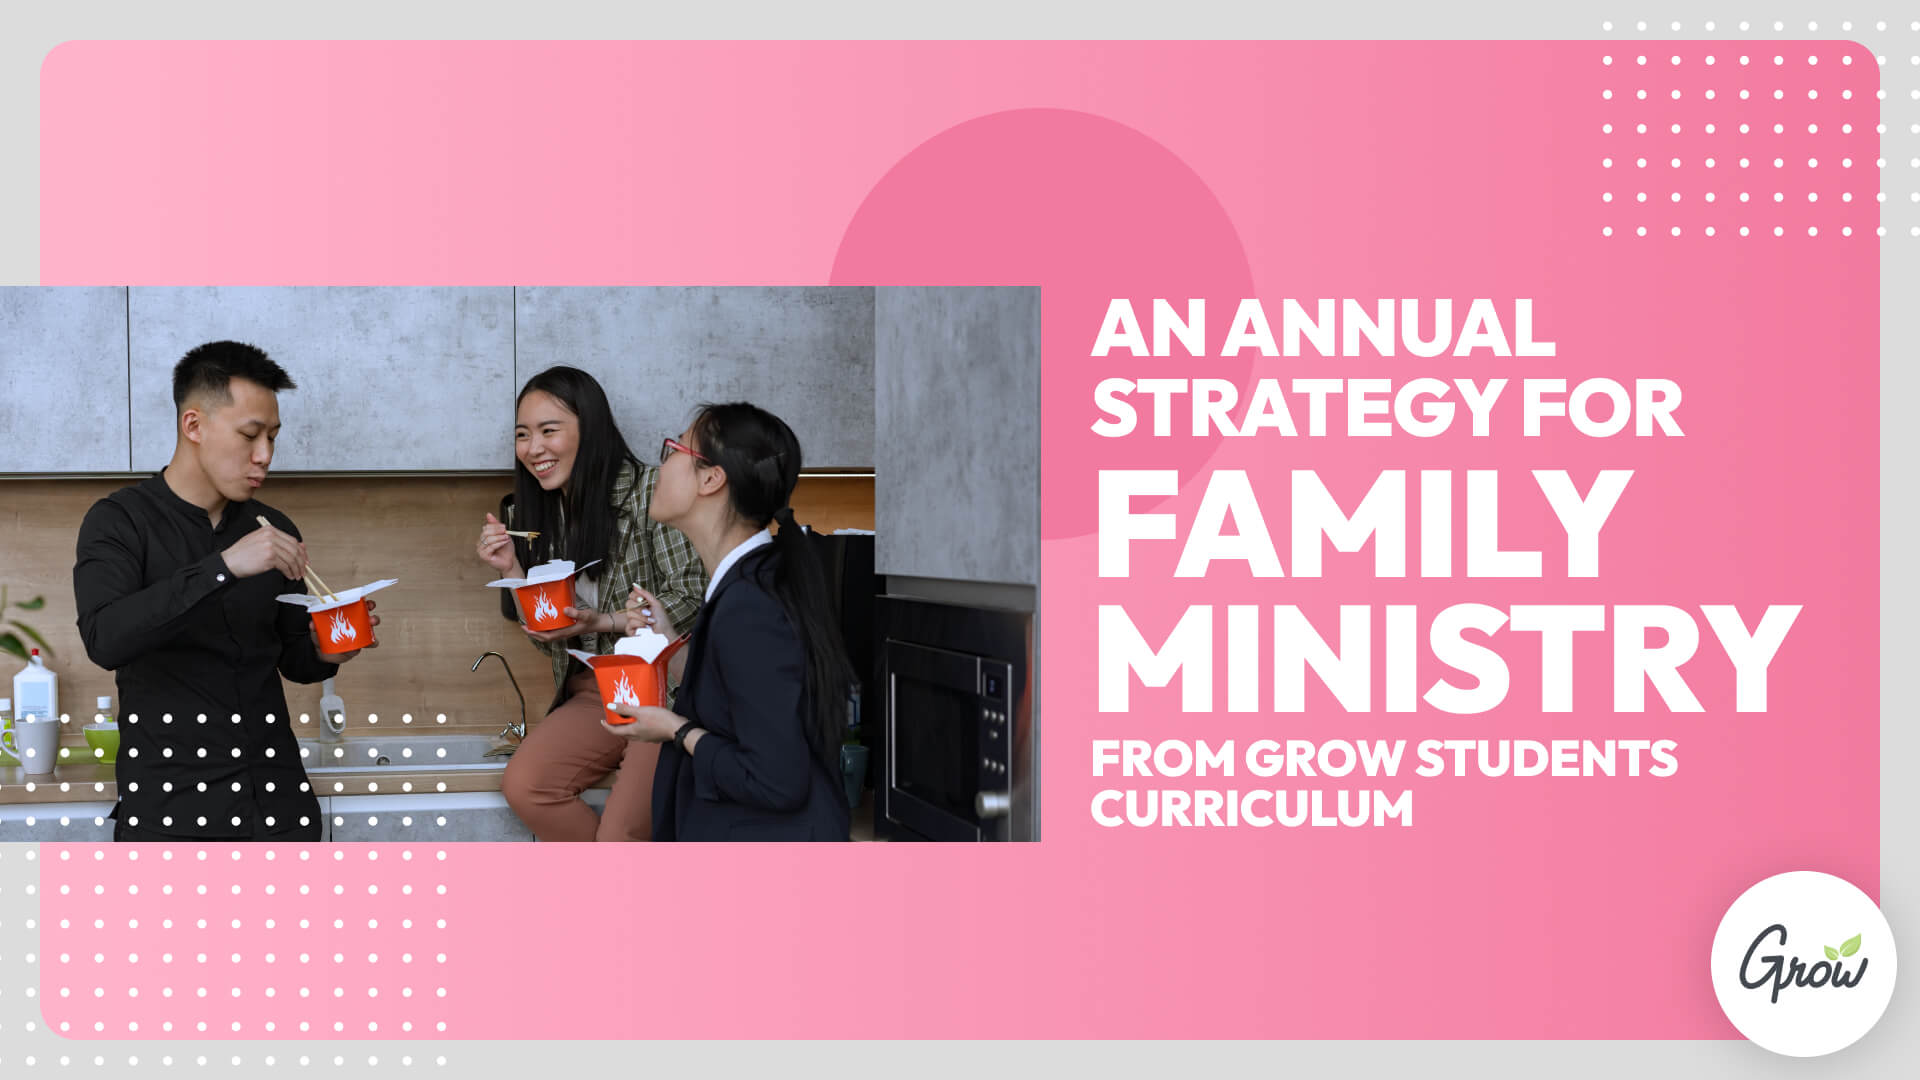 An Annual Strategy for Family Ministry from Grow Students Curriculum